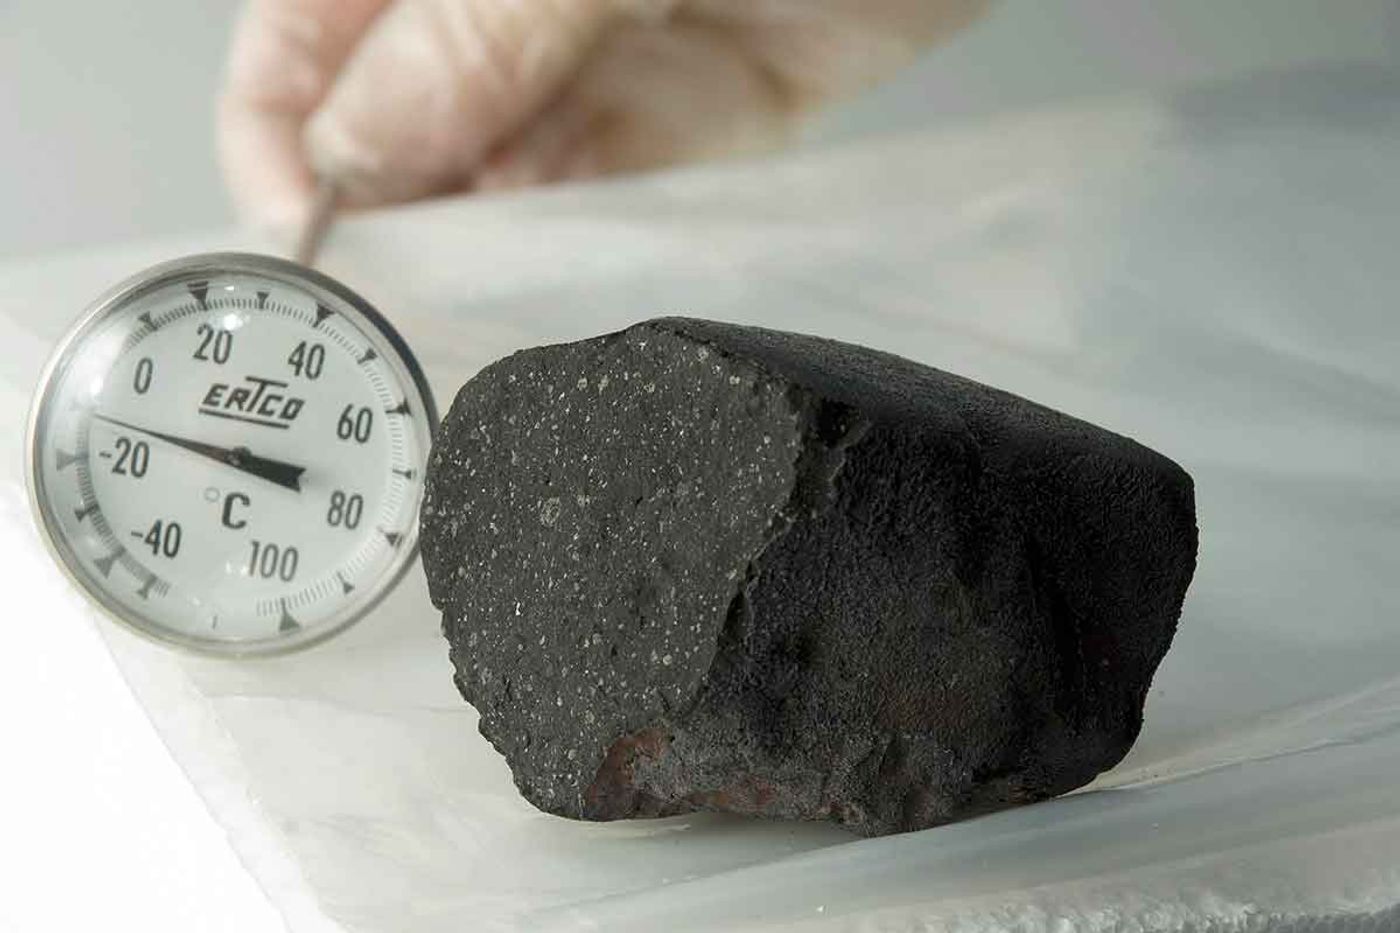 The special meteorite that struck Tagish Lake in Canada in 2000.